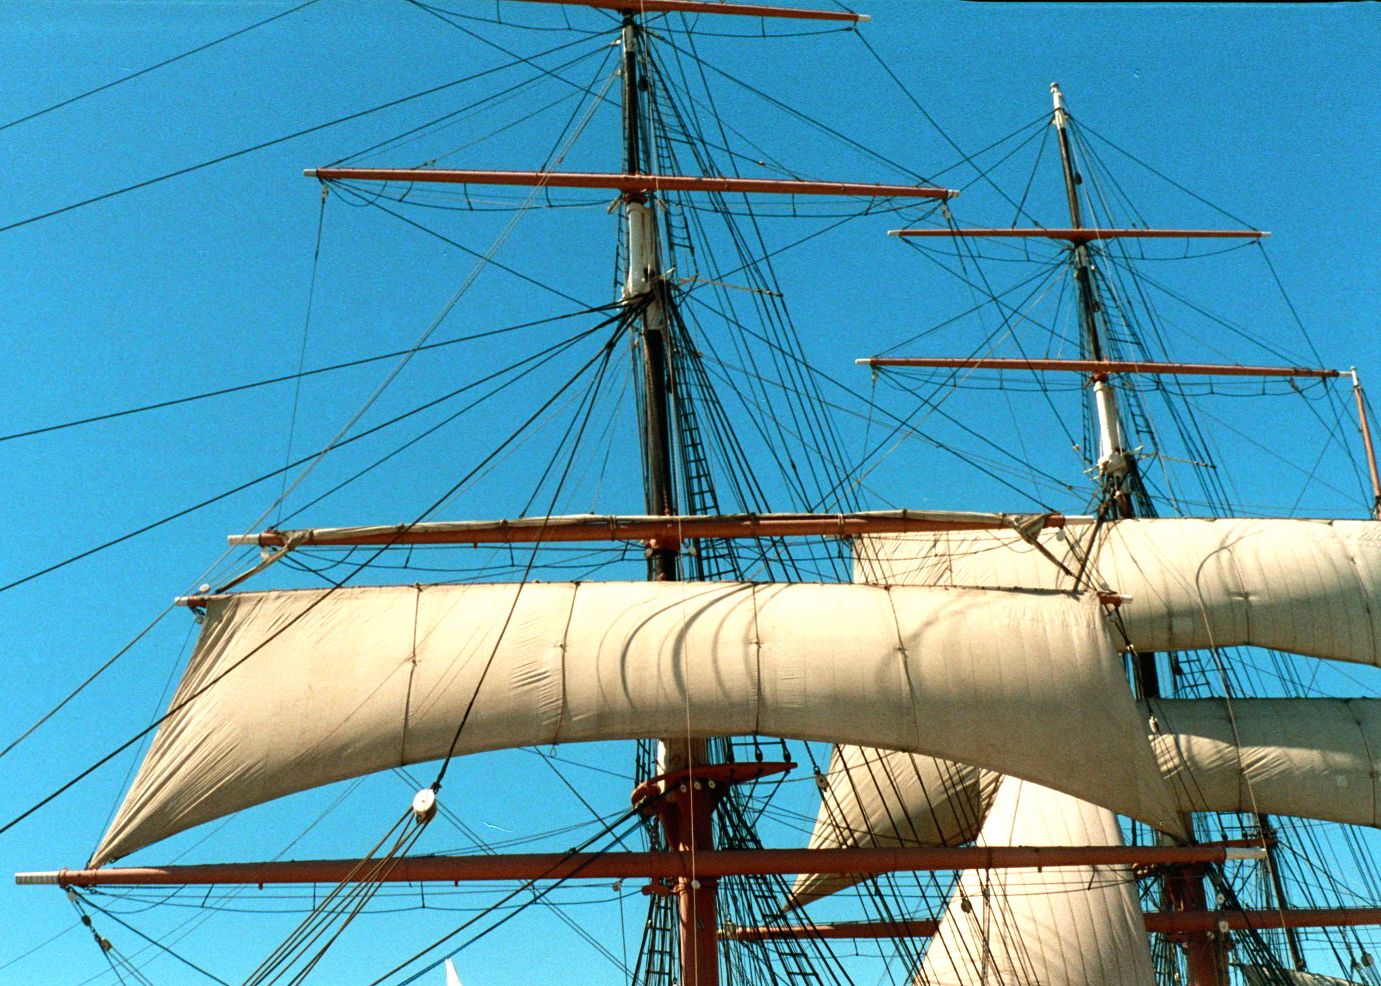 Star of India sails